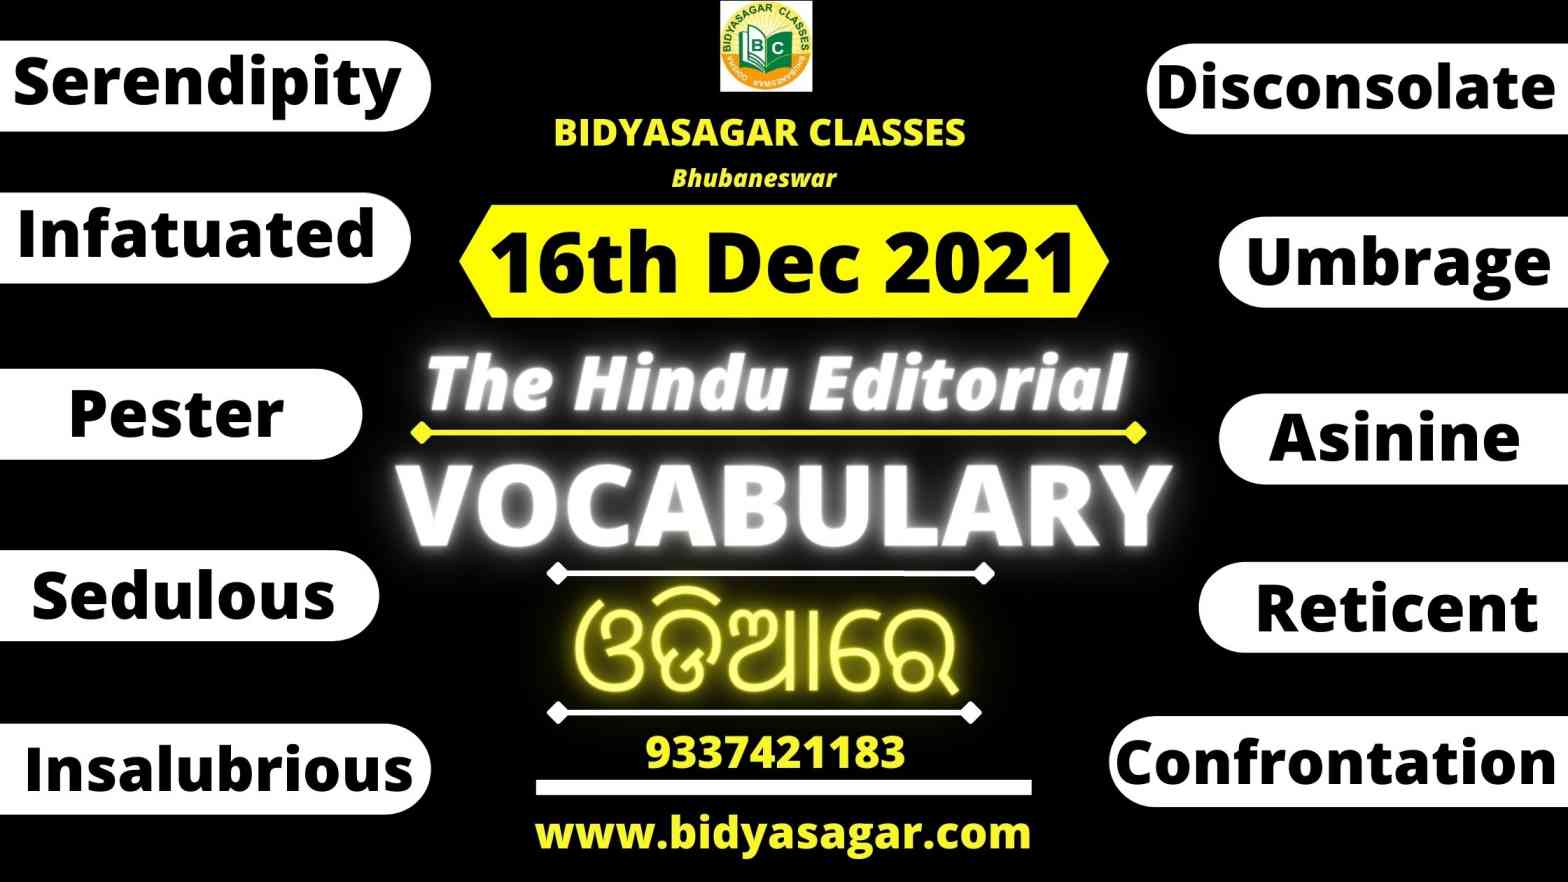 The Hindu Editorial Vocabulary of 16th December 2021